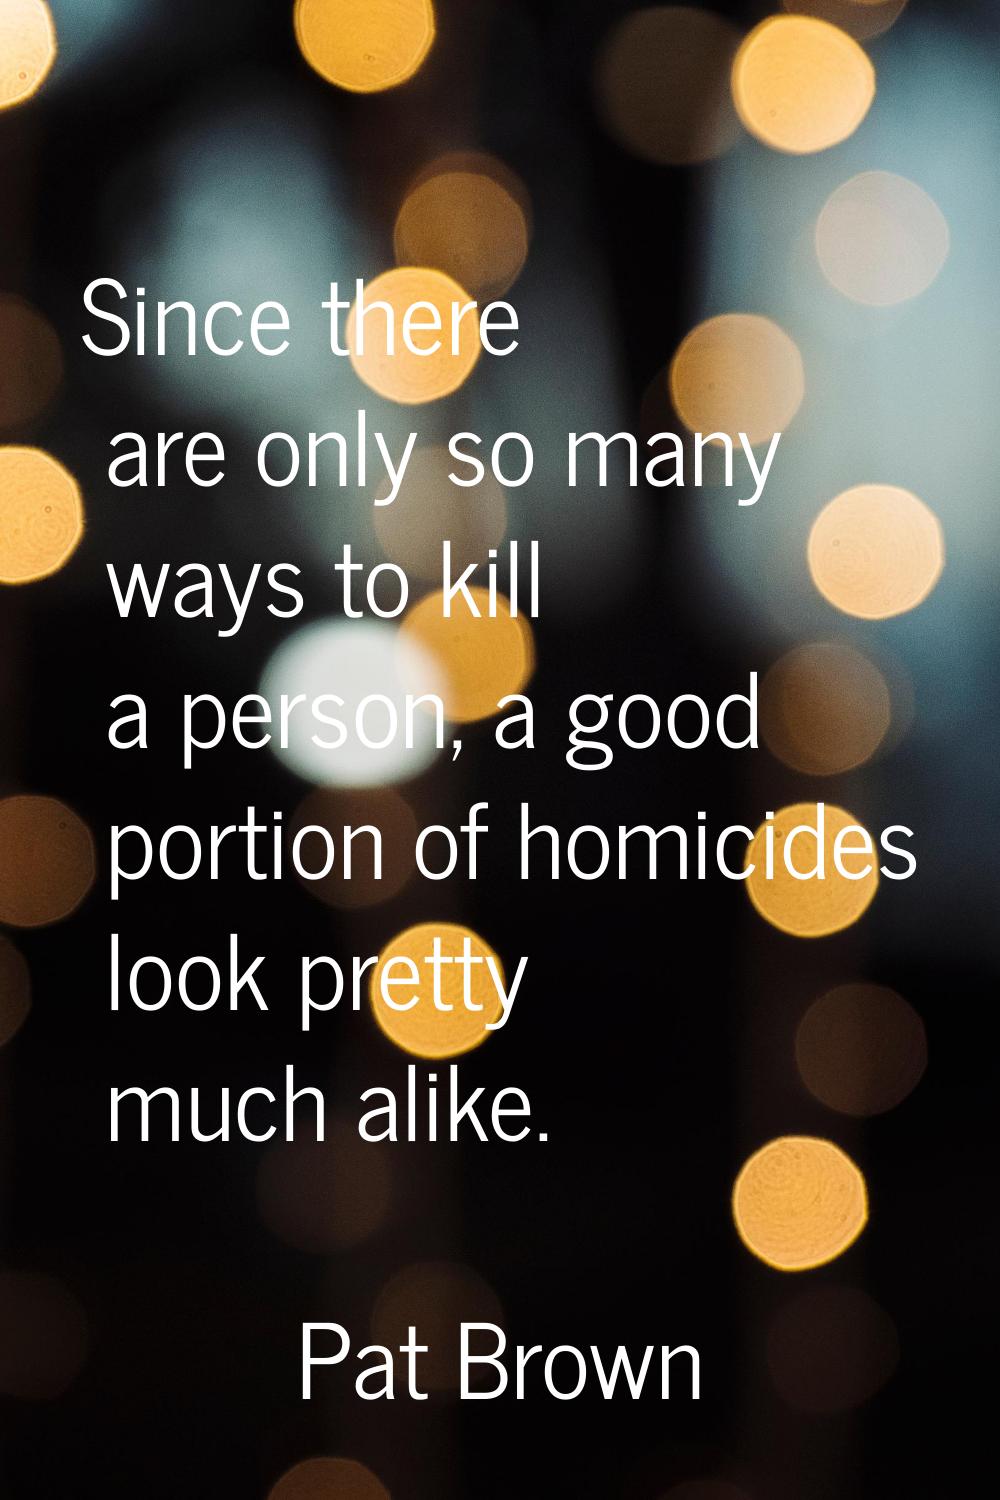 Since there are only so many ways to kill a person, a good portion of homicides look pretty much al